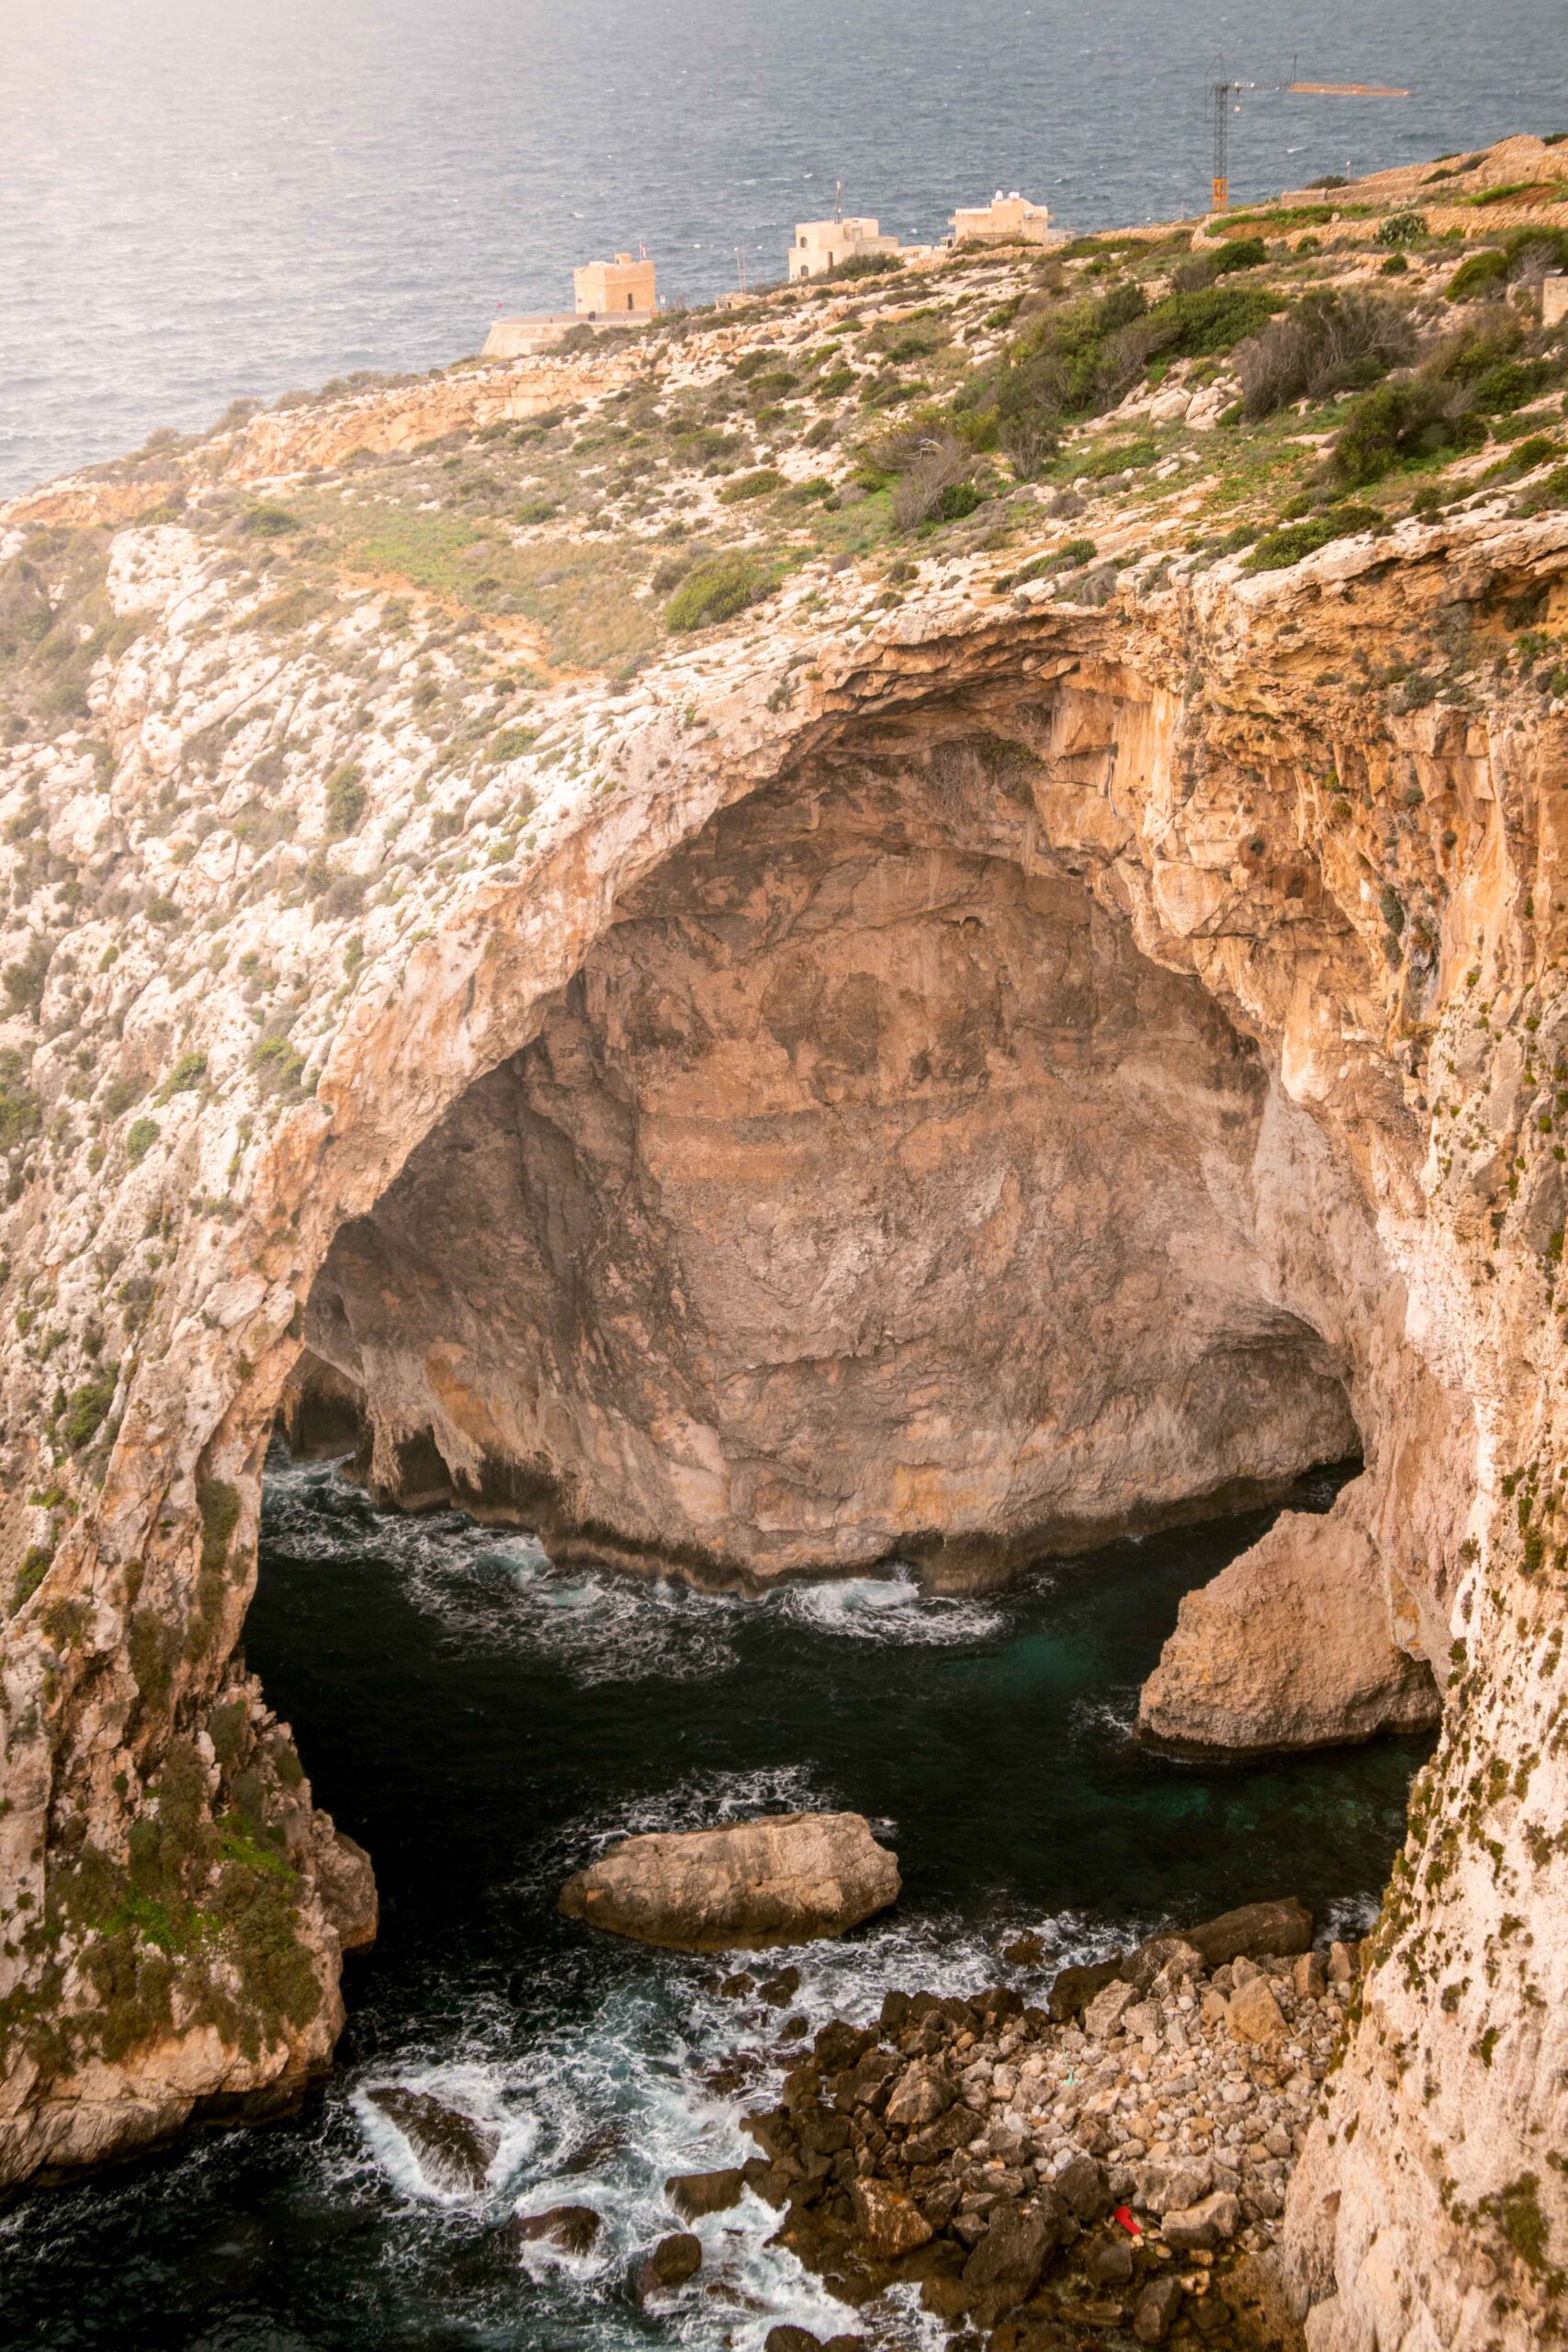 Inside of the Blue Grotto as seen from the Blue Wall and Grotto Viewpoint in Wied Iż-Żurrieq, Malta